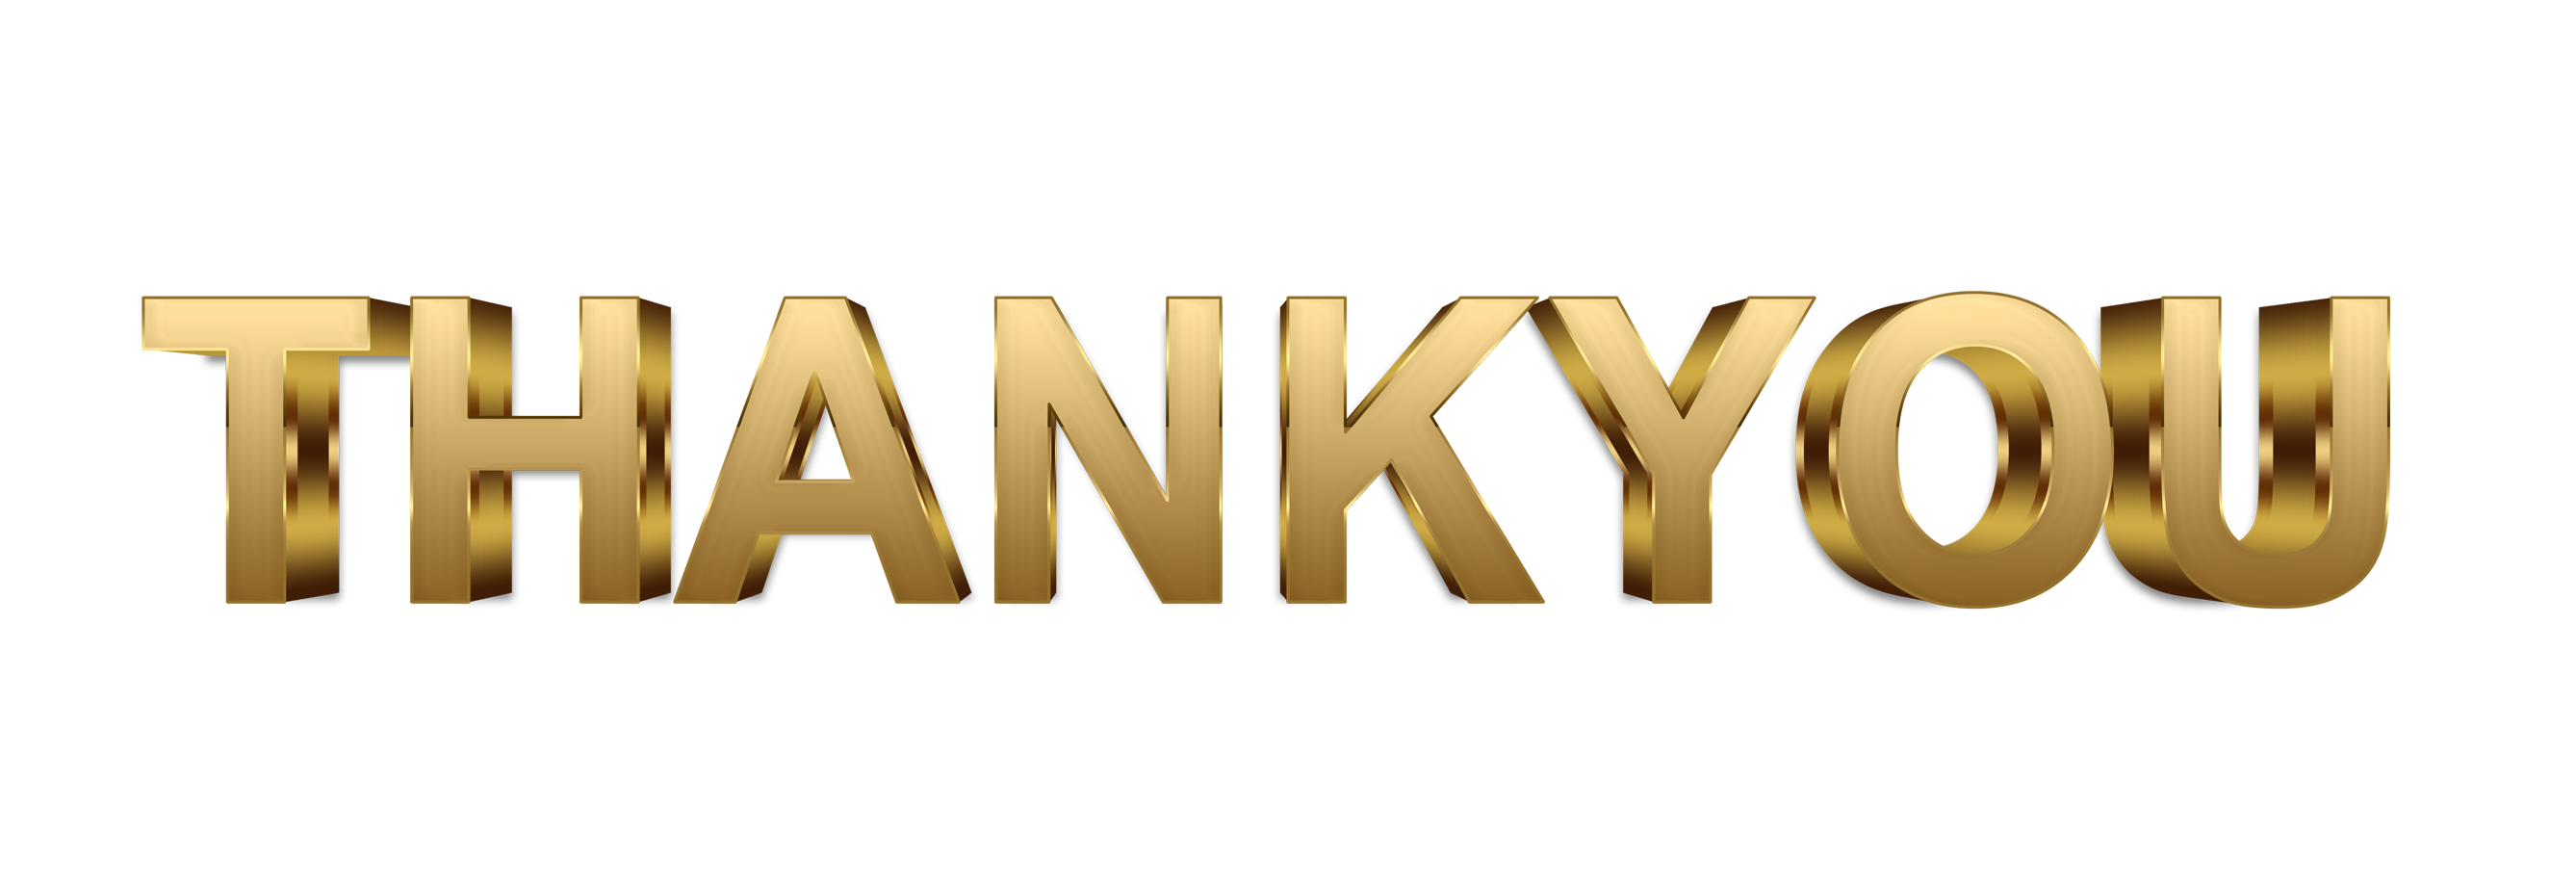 Thankyou word png, Thankyou png, word Thankyou gold text typography PNG images Thankyou png transparent background